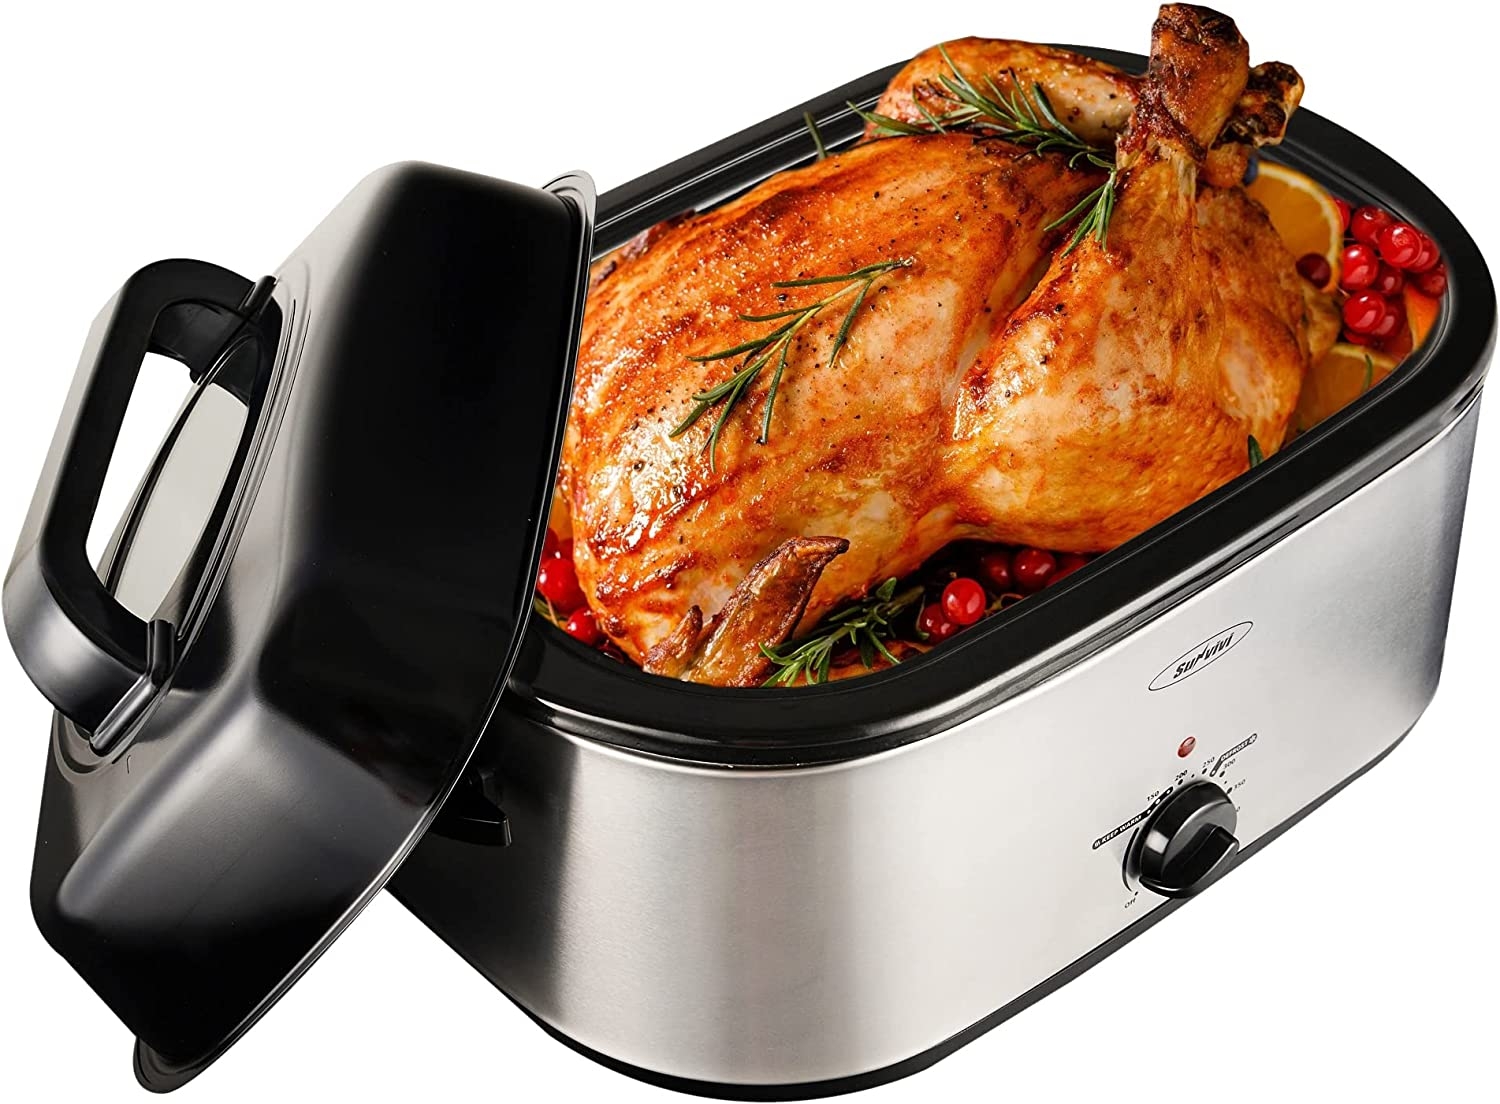 Roaster Oven Electric, Roaster Oven 22 Quart with Self-Basting Lid, Turkey Roaster Oven with Removable Pan and Rack, Adjustable